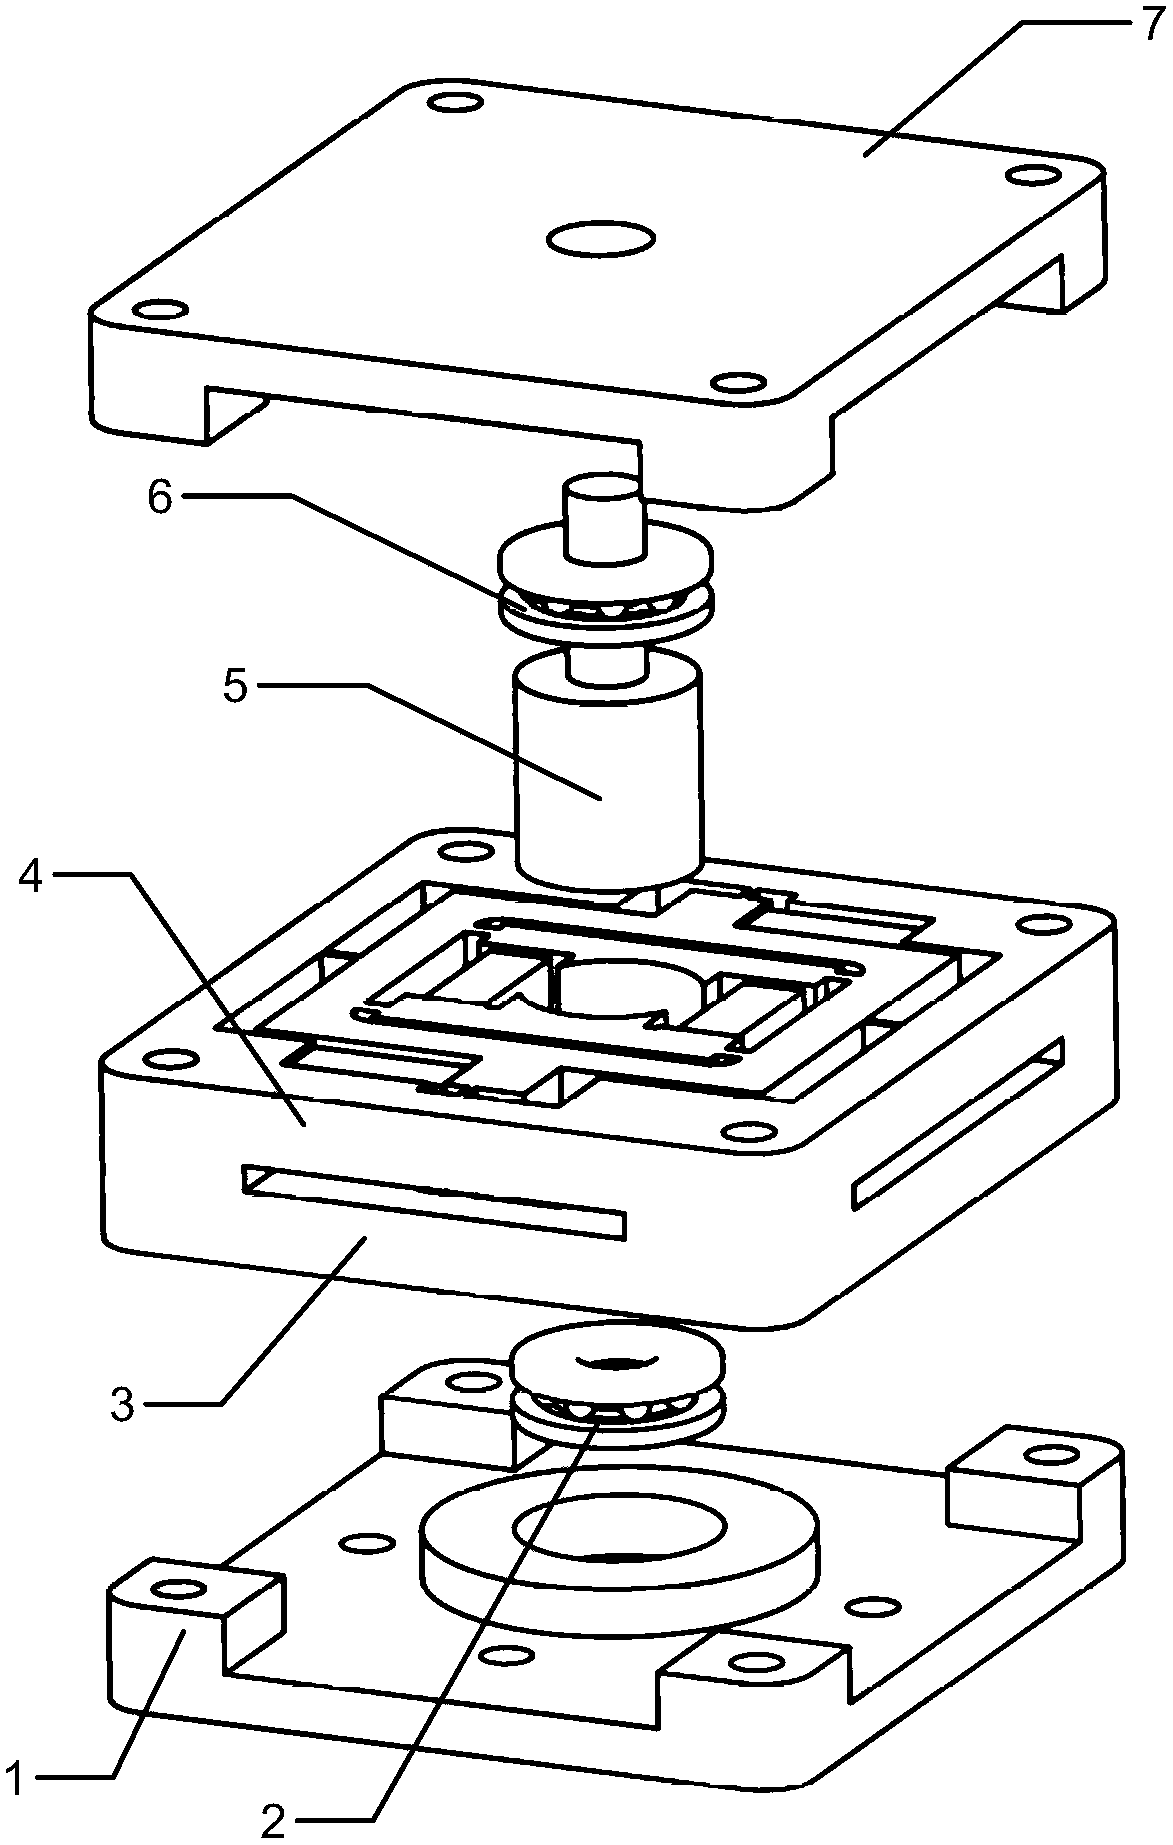 Piezoelectric drive high-precision rotary actuation device and method with integrated clamp drive